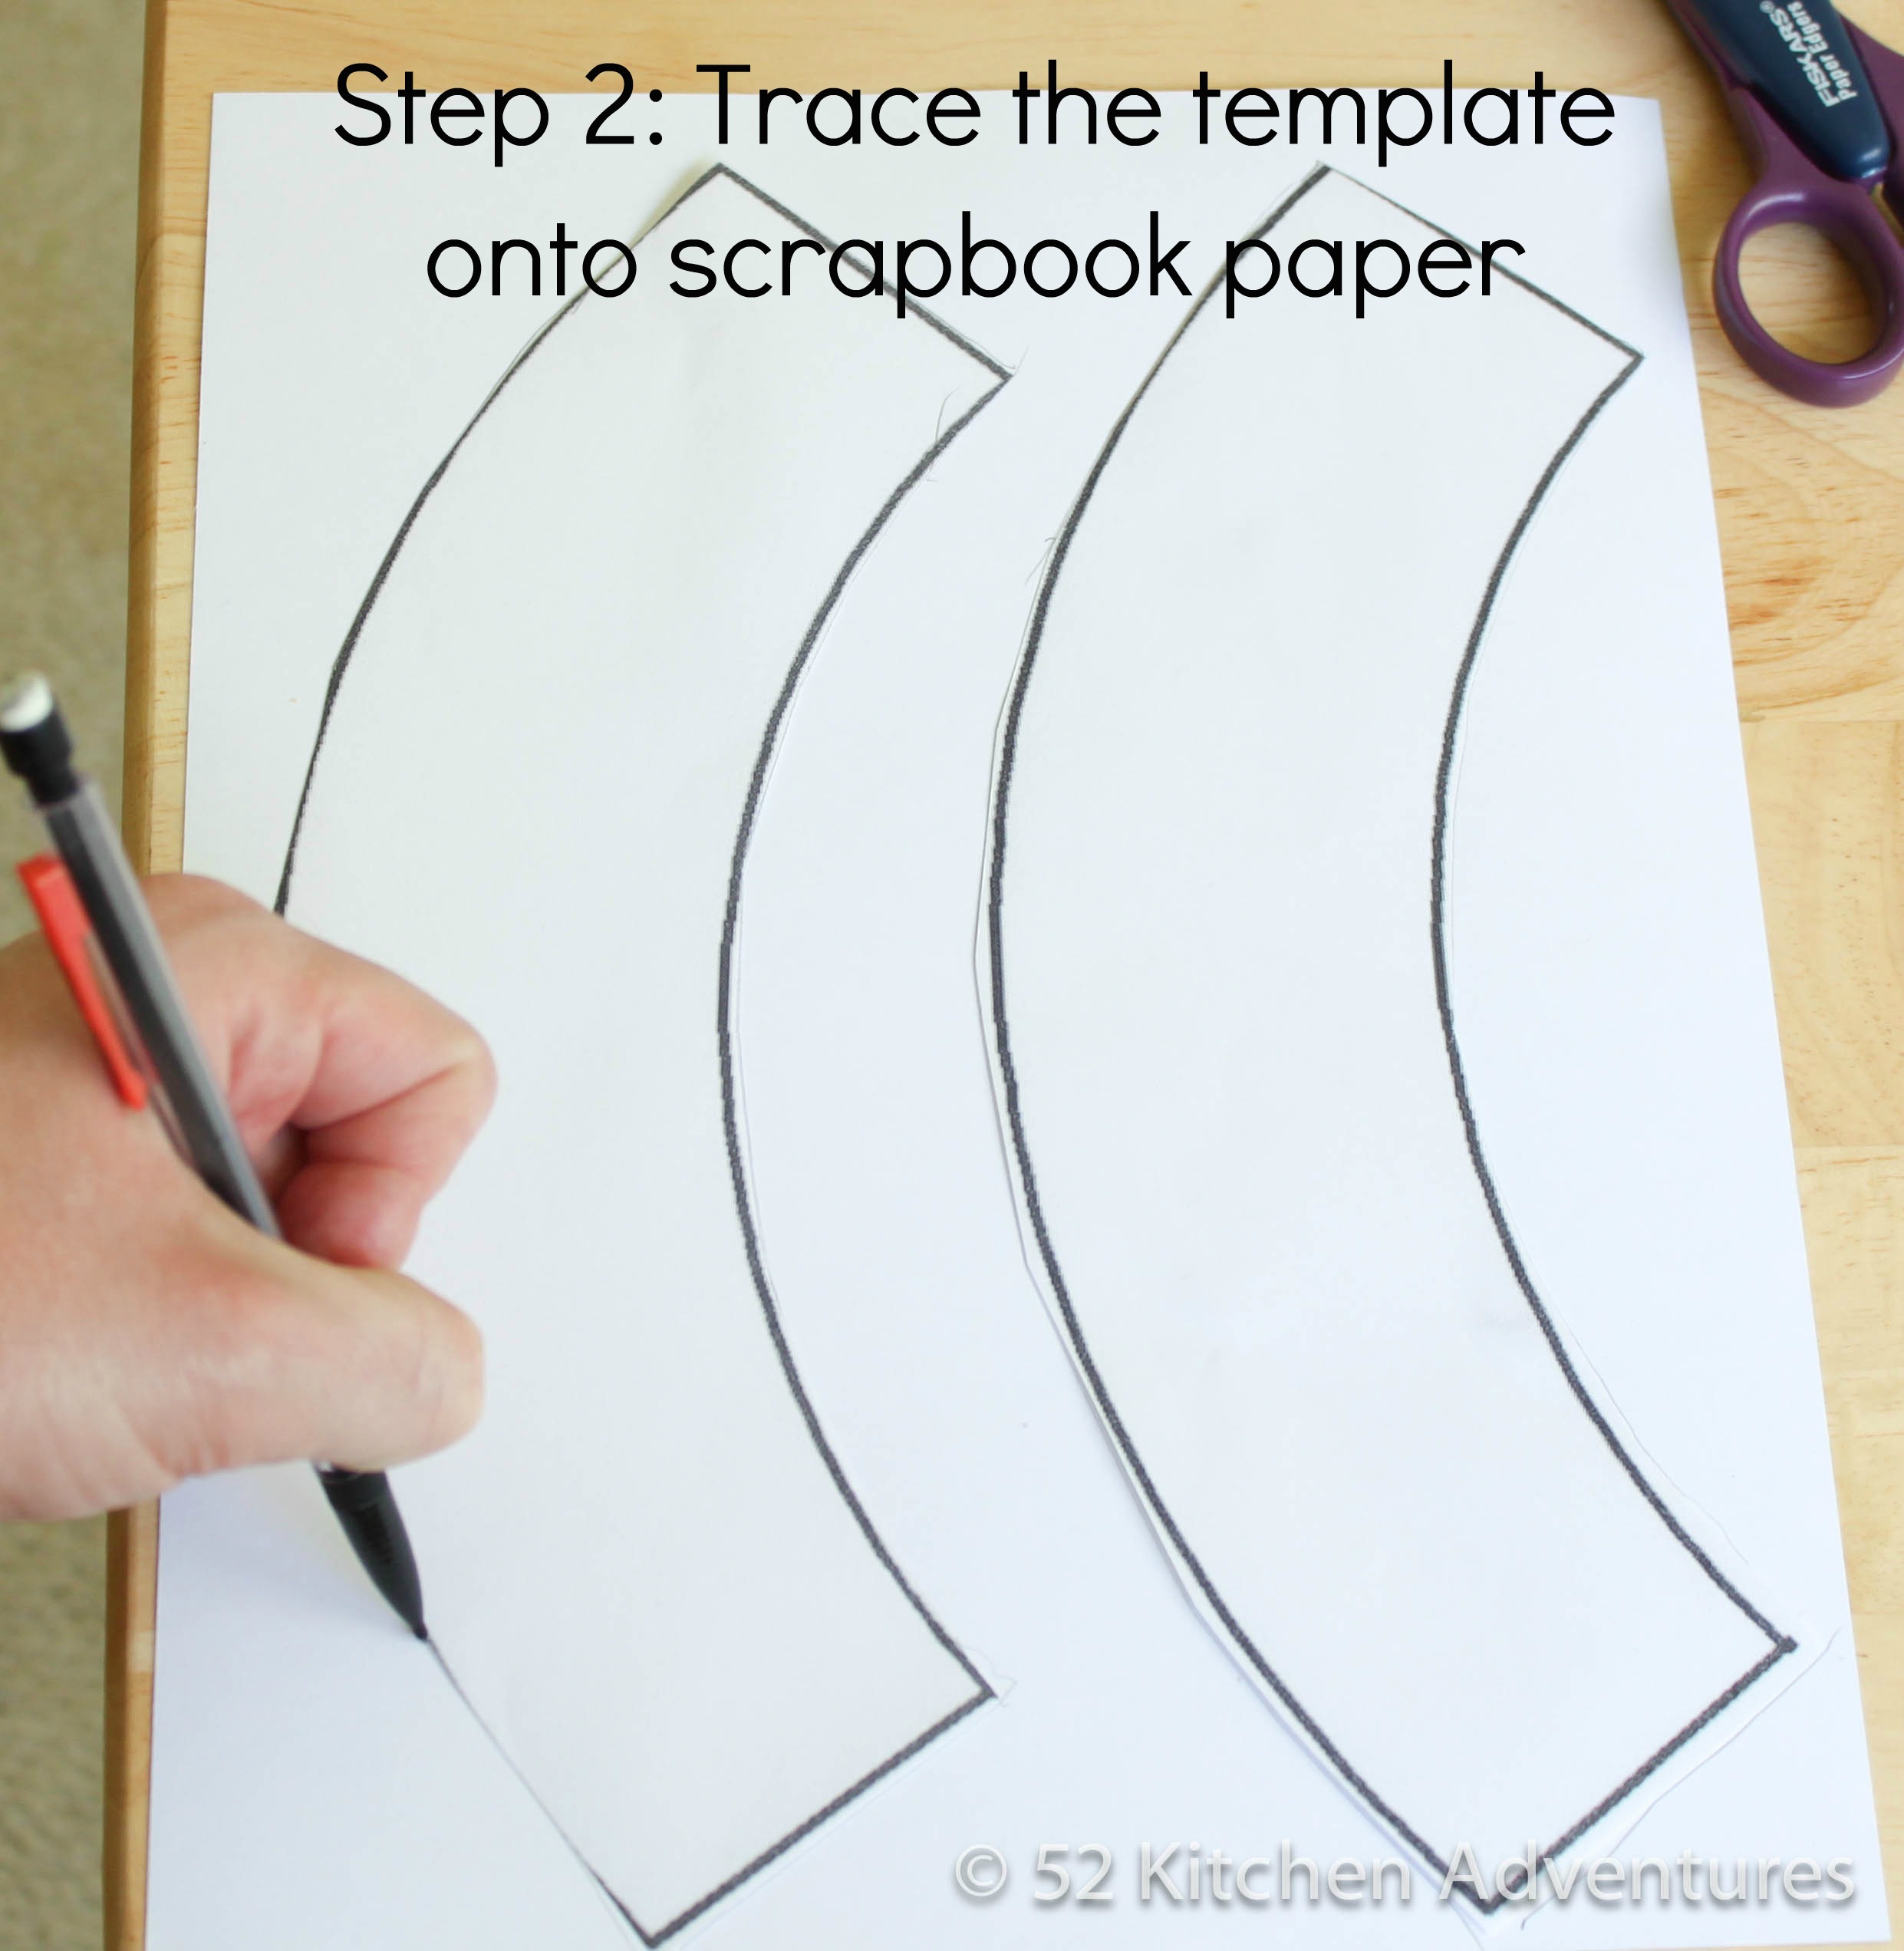 Step 2 Trace the template onto scrapbook paper